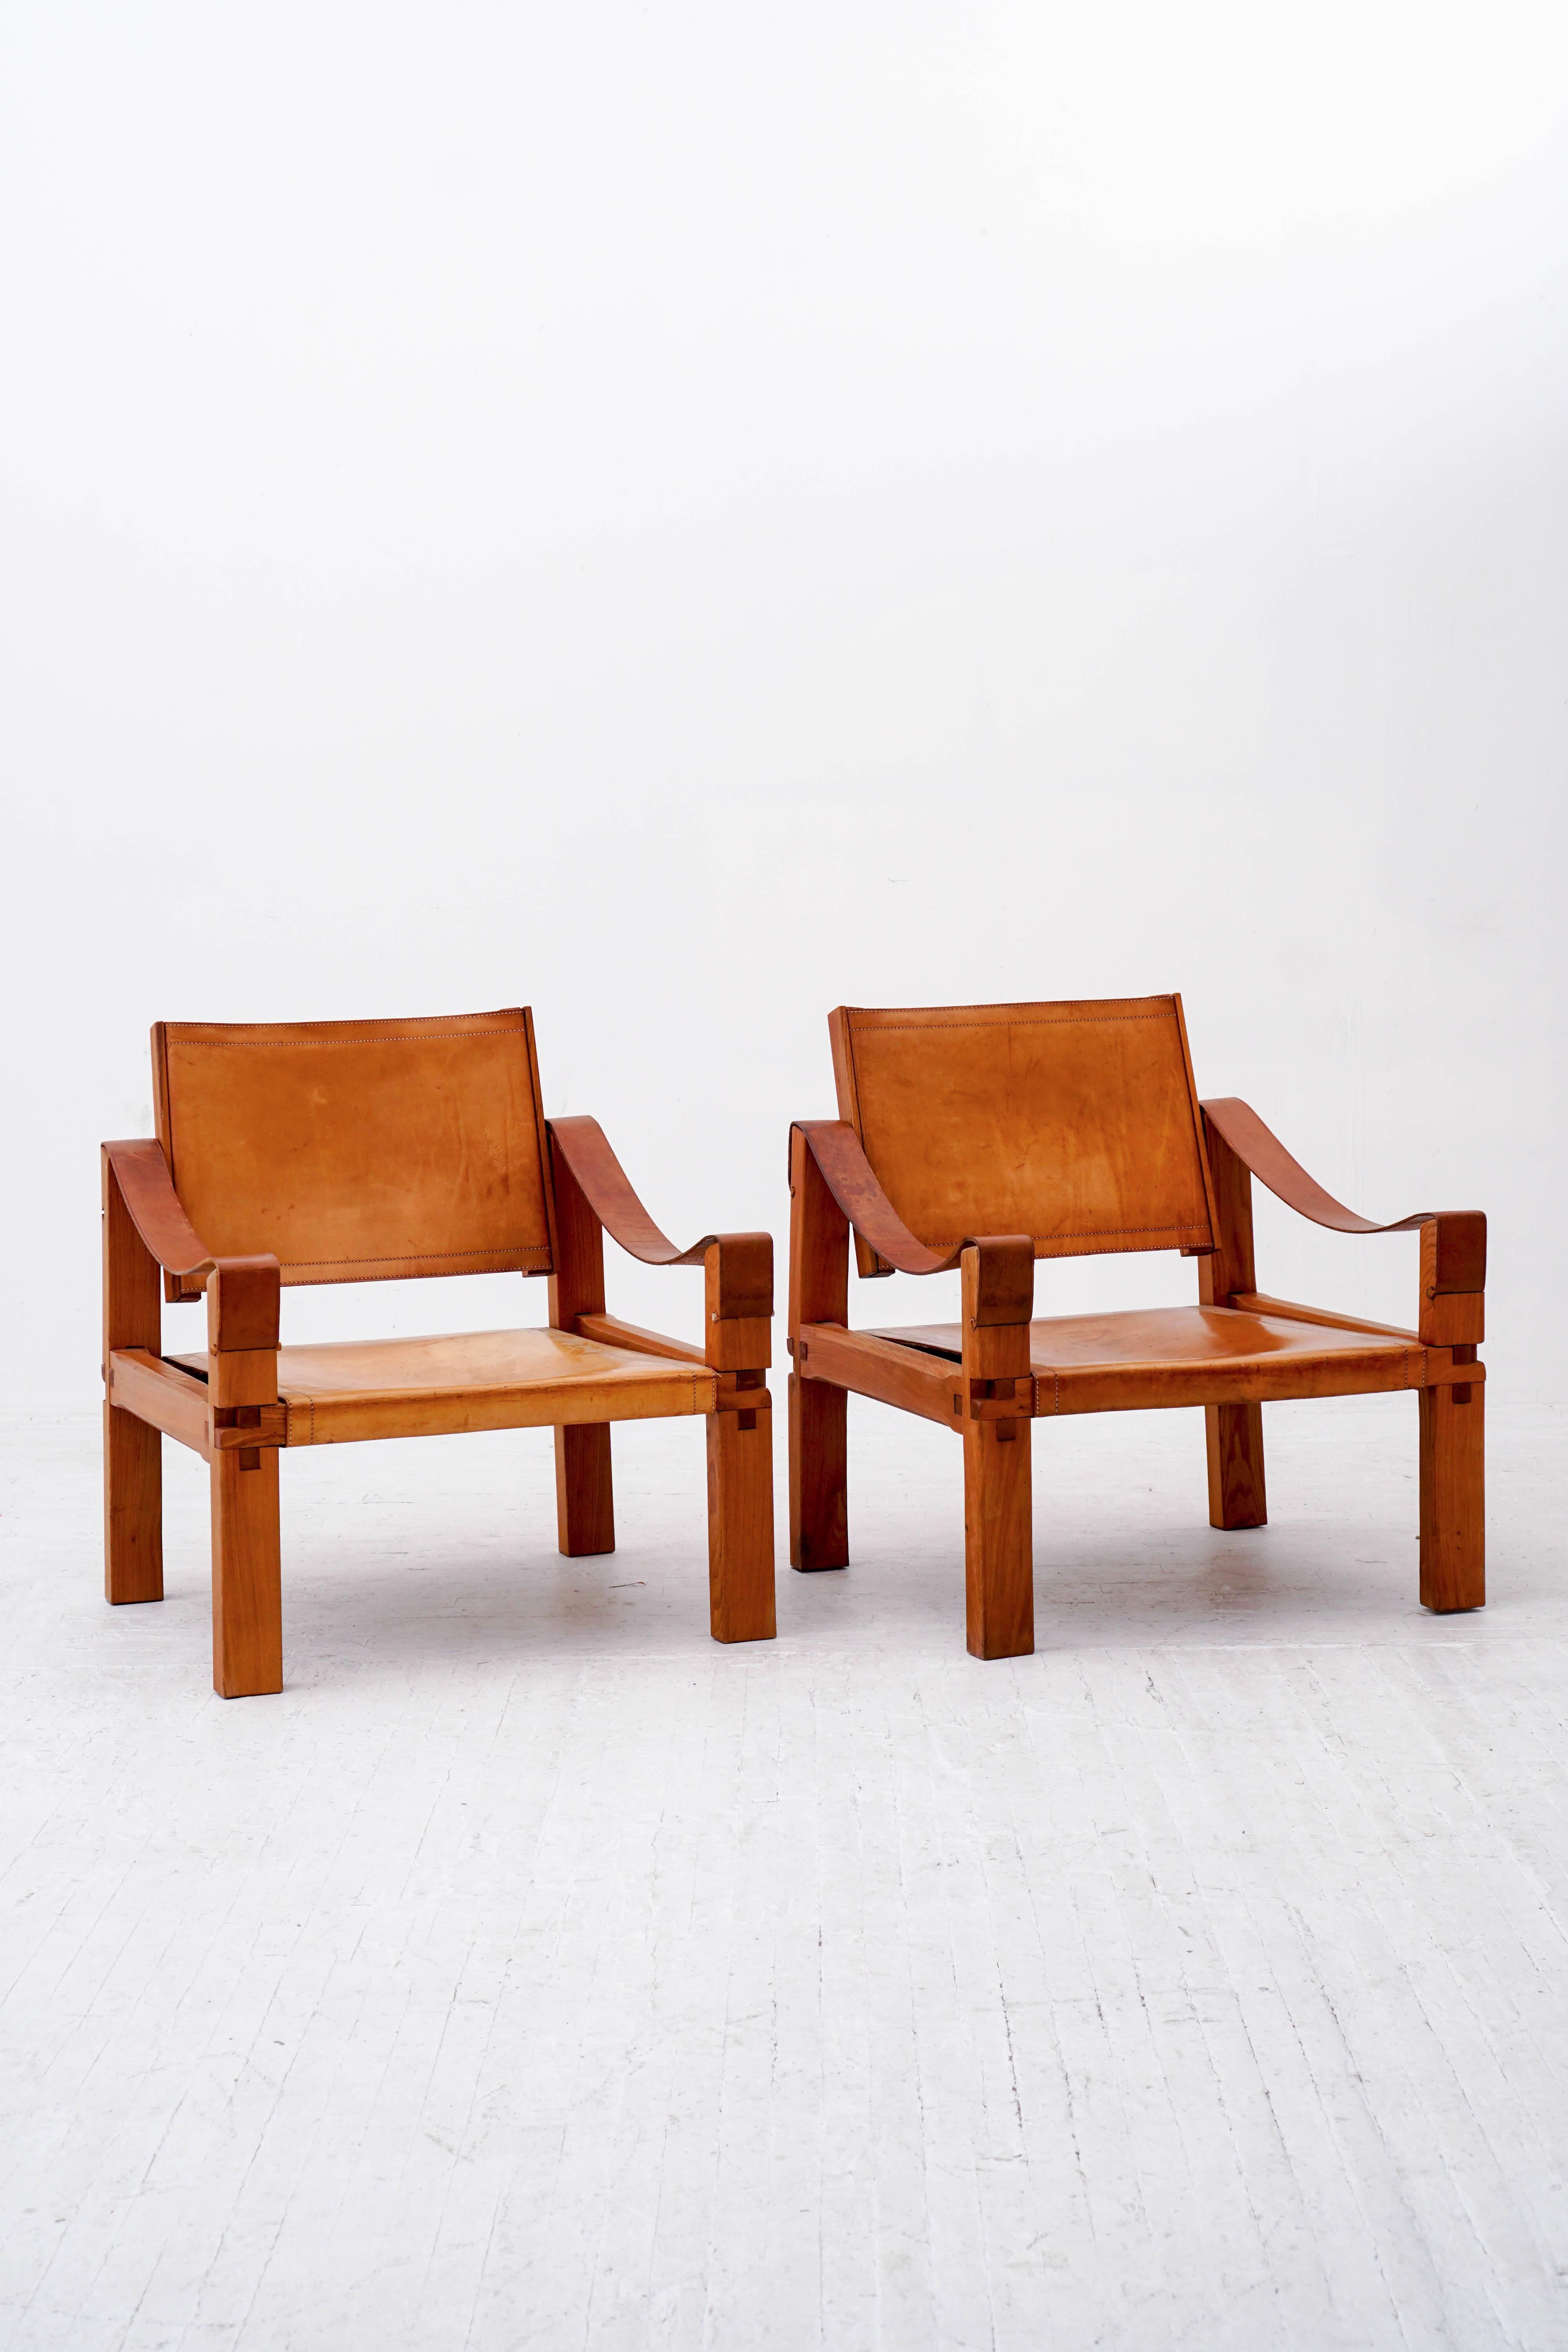 A pair of rare S10 lounge chairs by Pierre Chapo with signature wood joinery and thick saddle leather. fabricated at his atelier circa 1960. They are comfortable and with a tilting back. 

Leather has a beautiful patina while remaining strong and